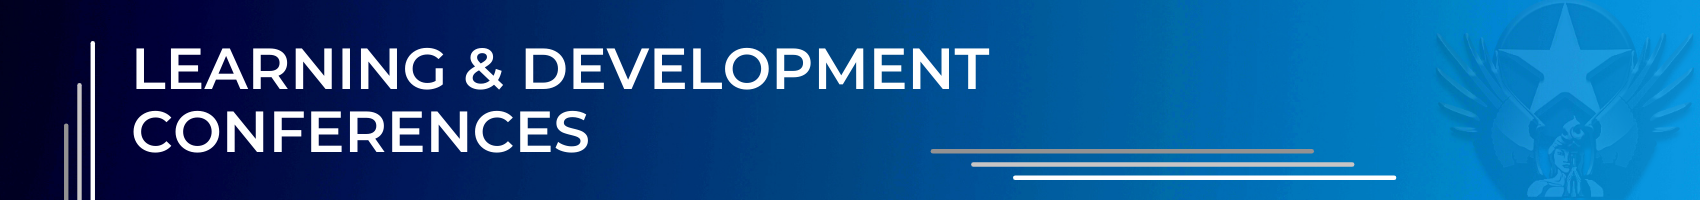 Learning & Development Conference Banner 